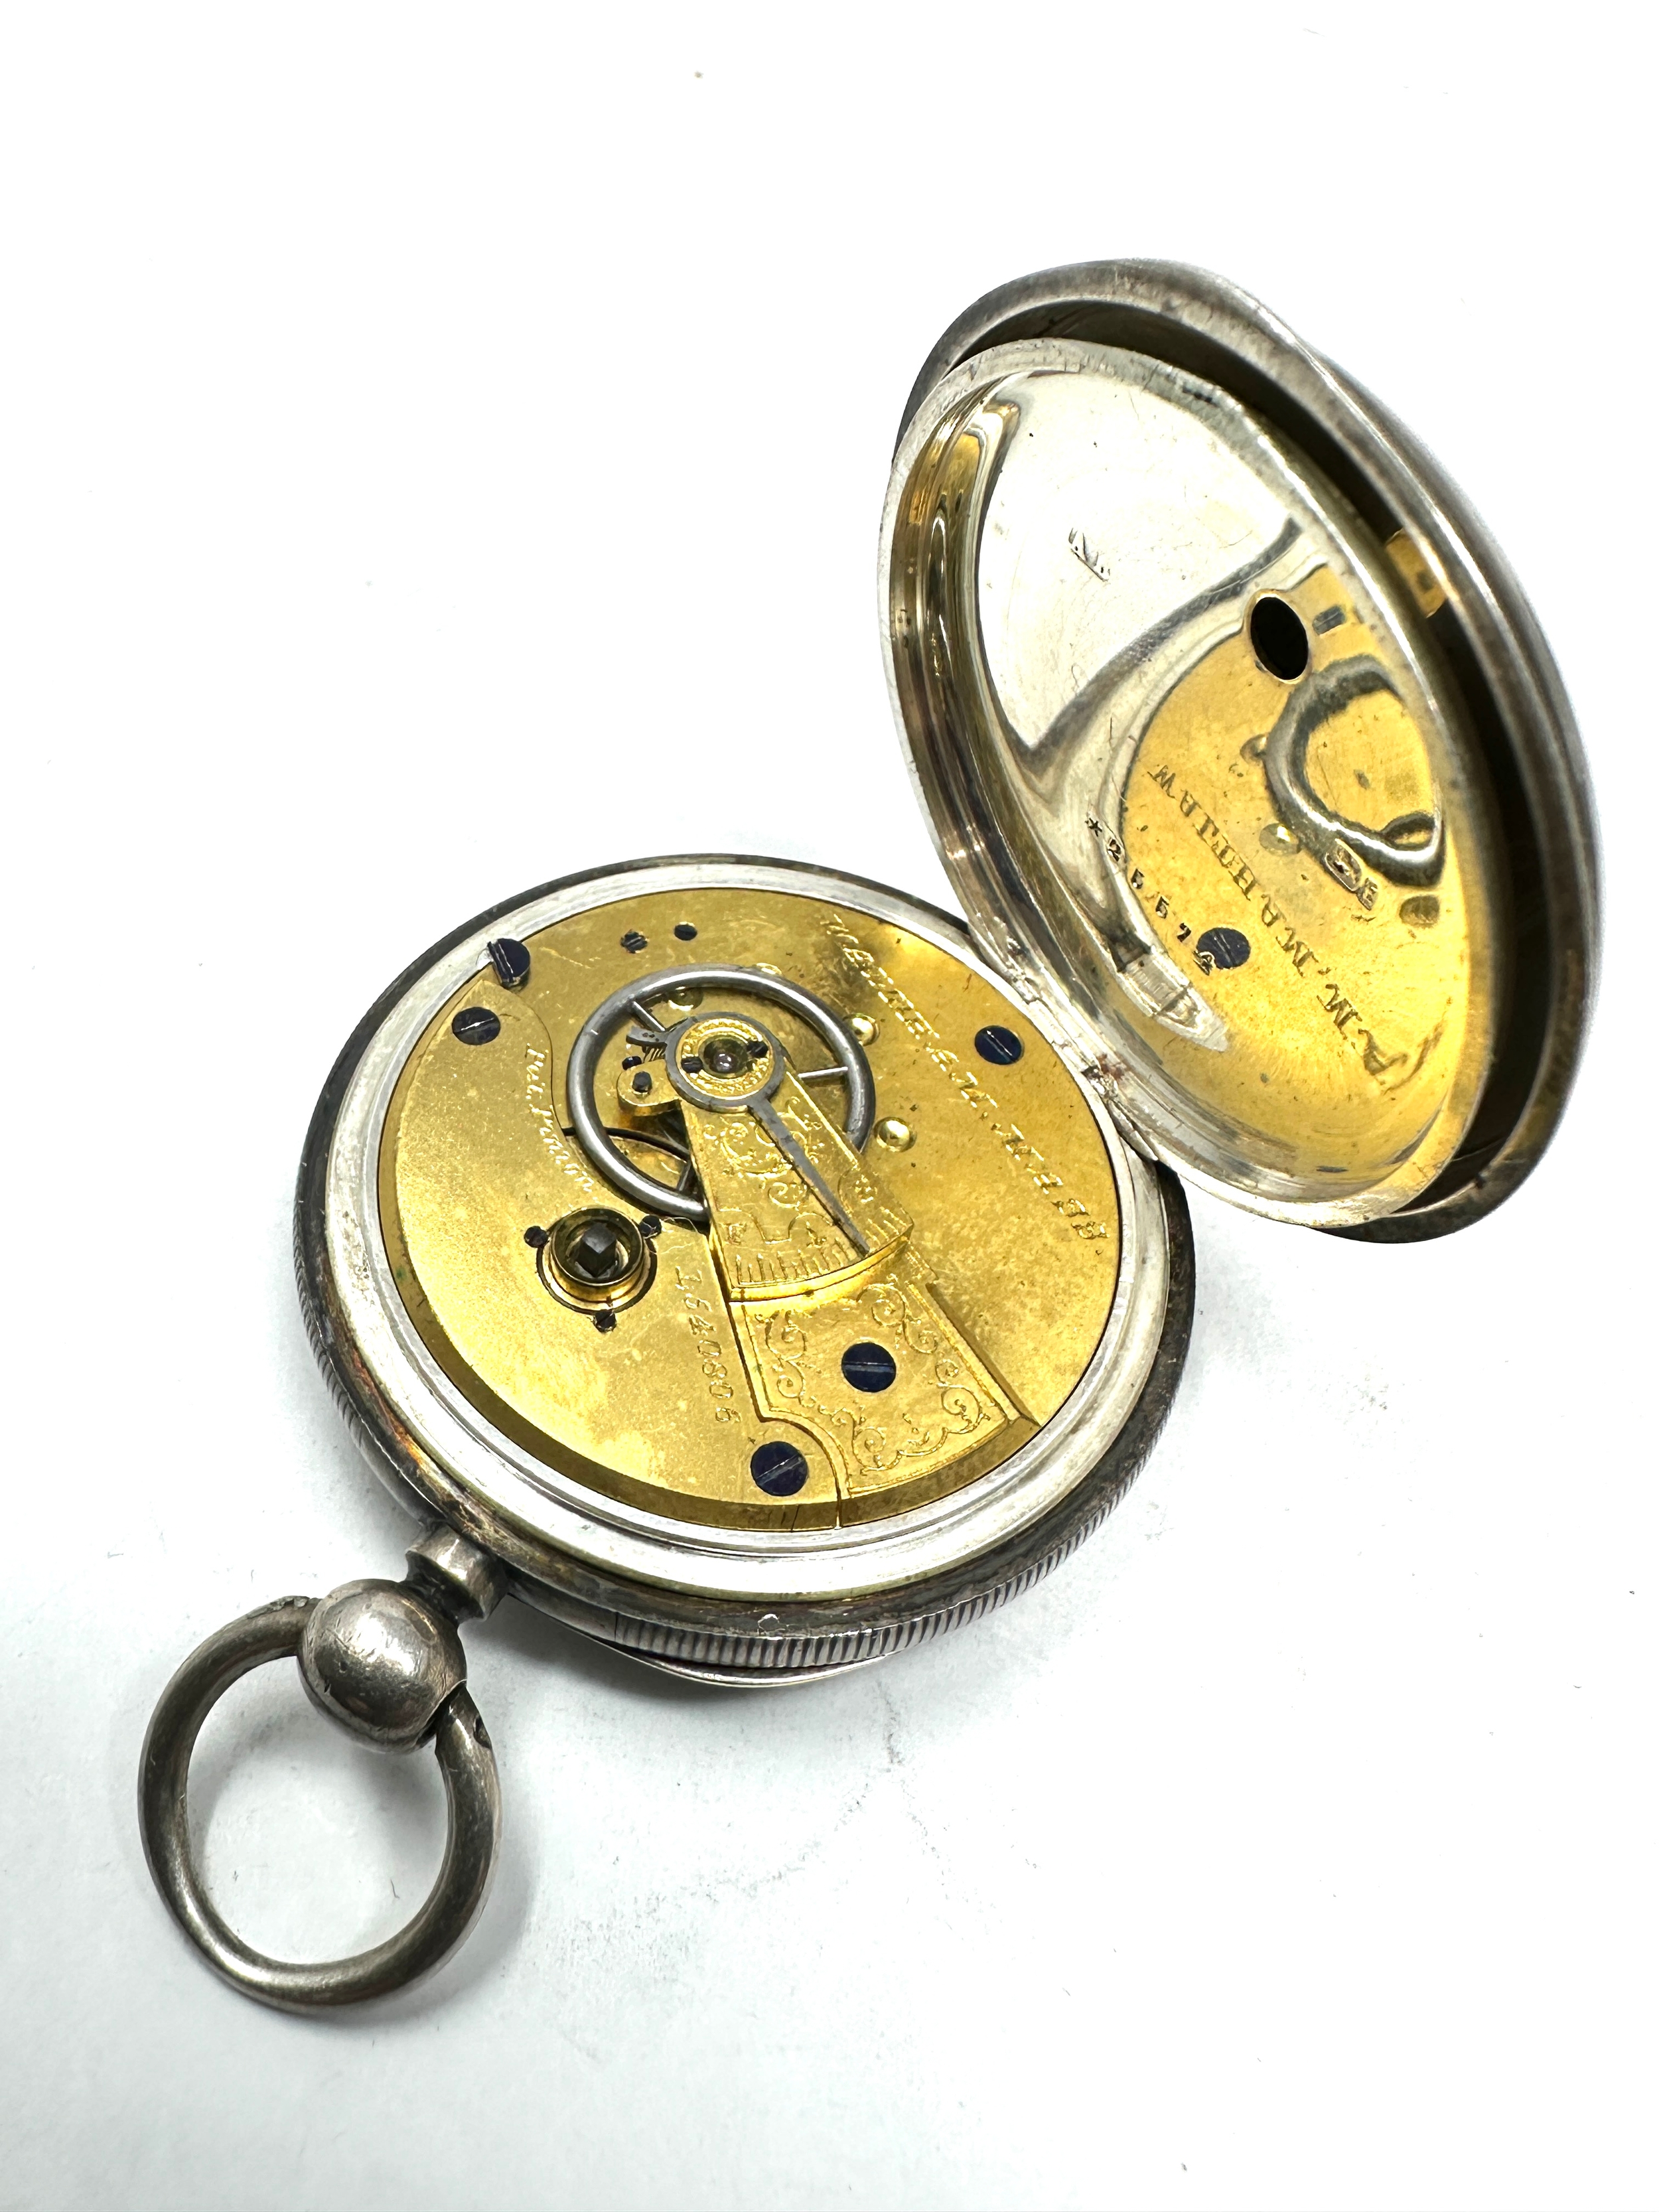 Antique silver open face pocket watch waltham mass movement the watch is ticking - Image 4 of 5